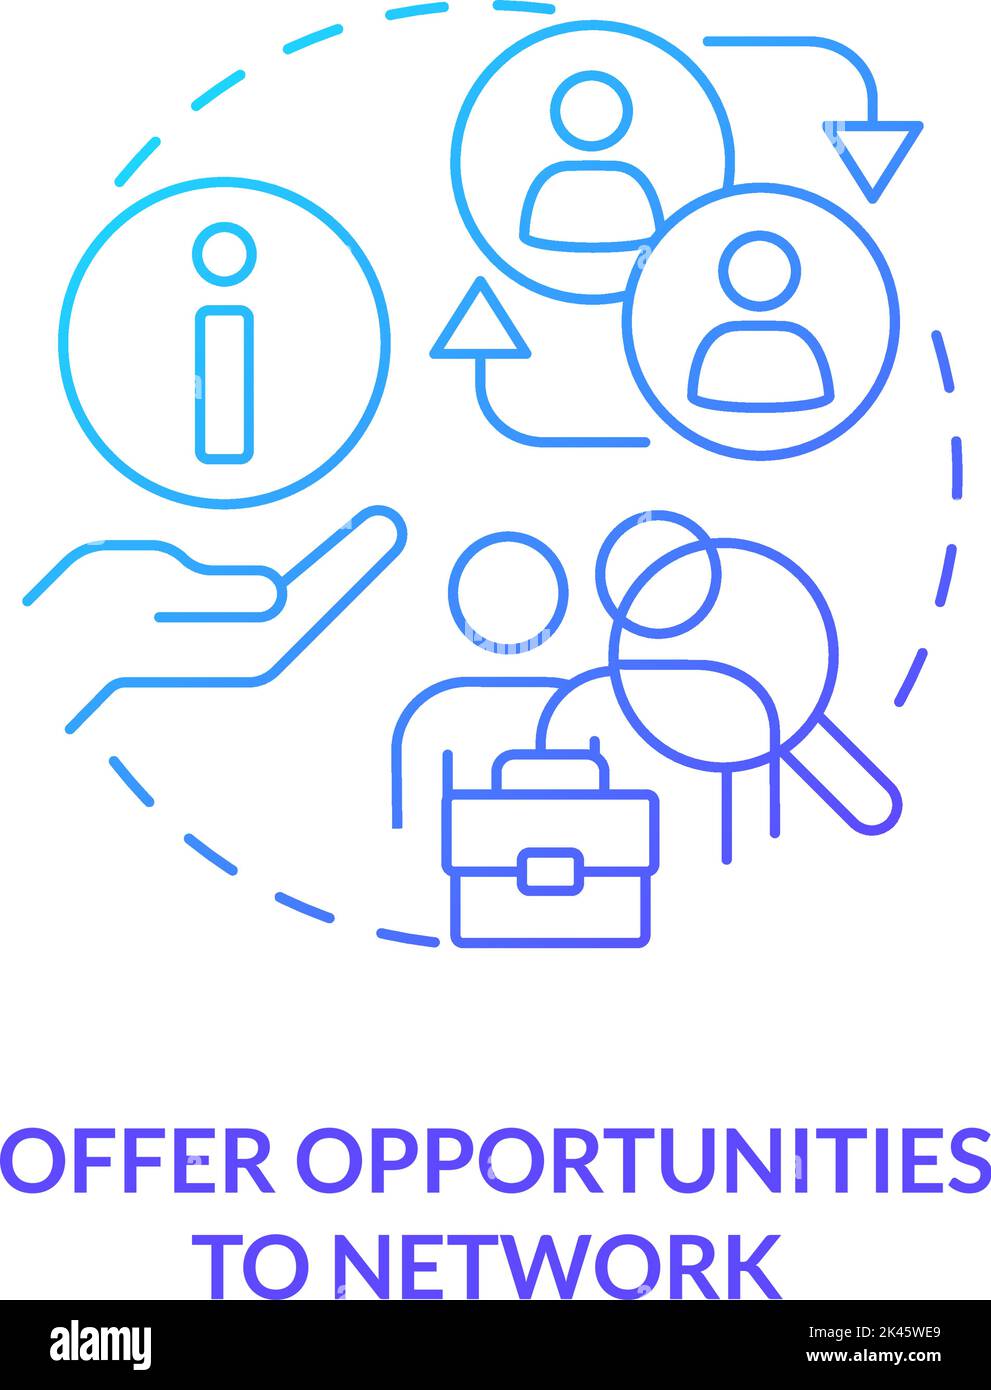 Offer opportunities to network blue gradient concept icon Stock Vector